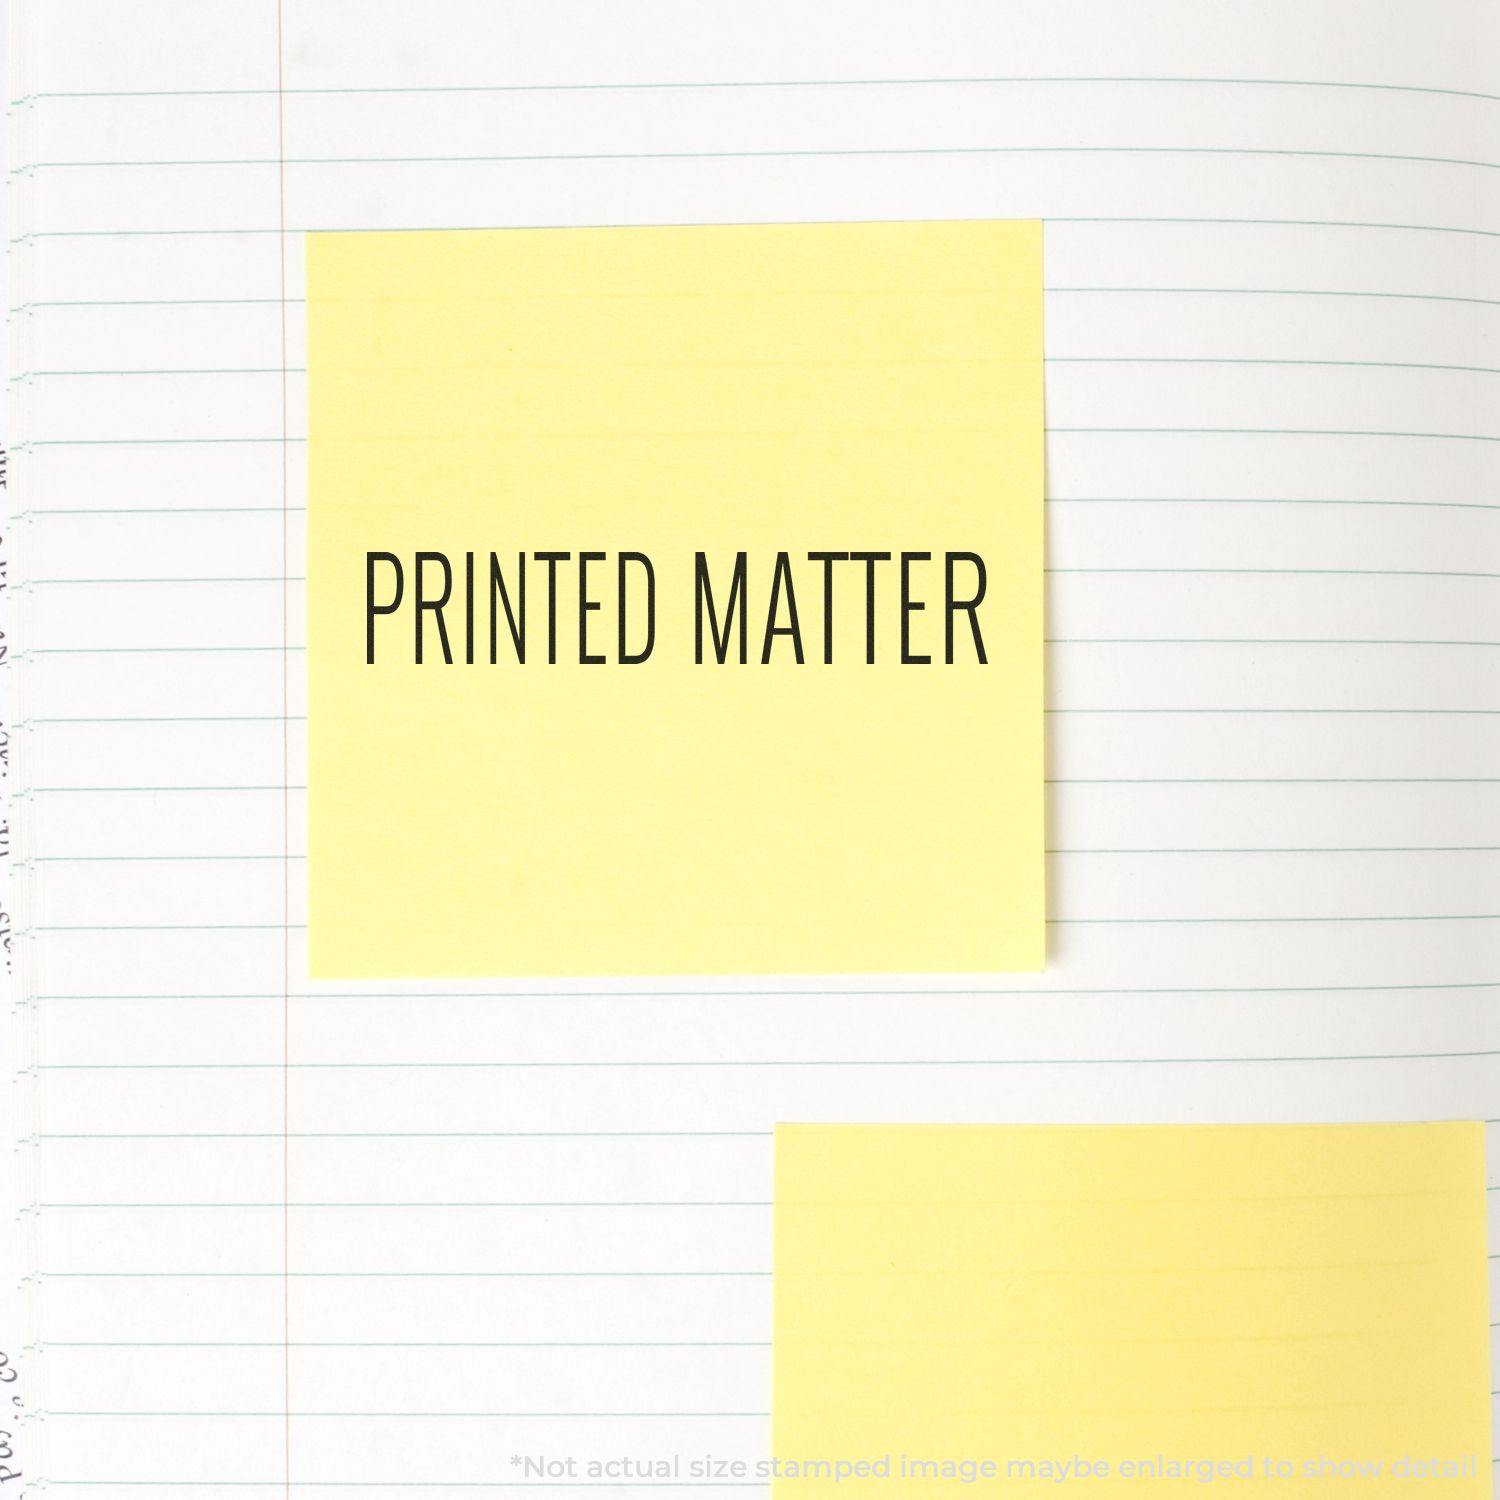 A stock office rubber stamp with a stamped image showing how the text "PRINTED MATTER" is displayed after stamping.